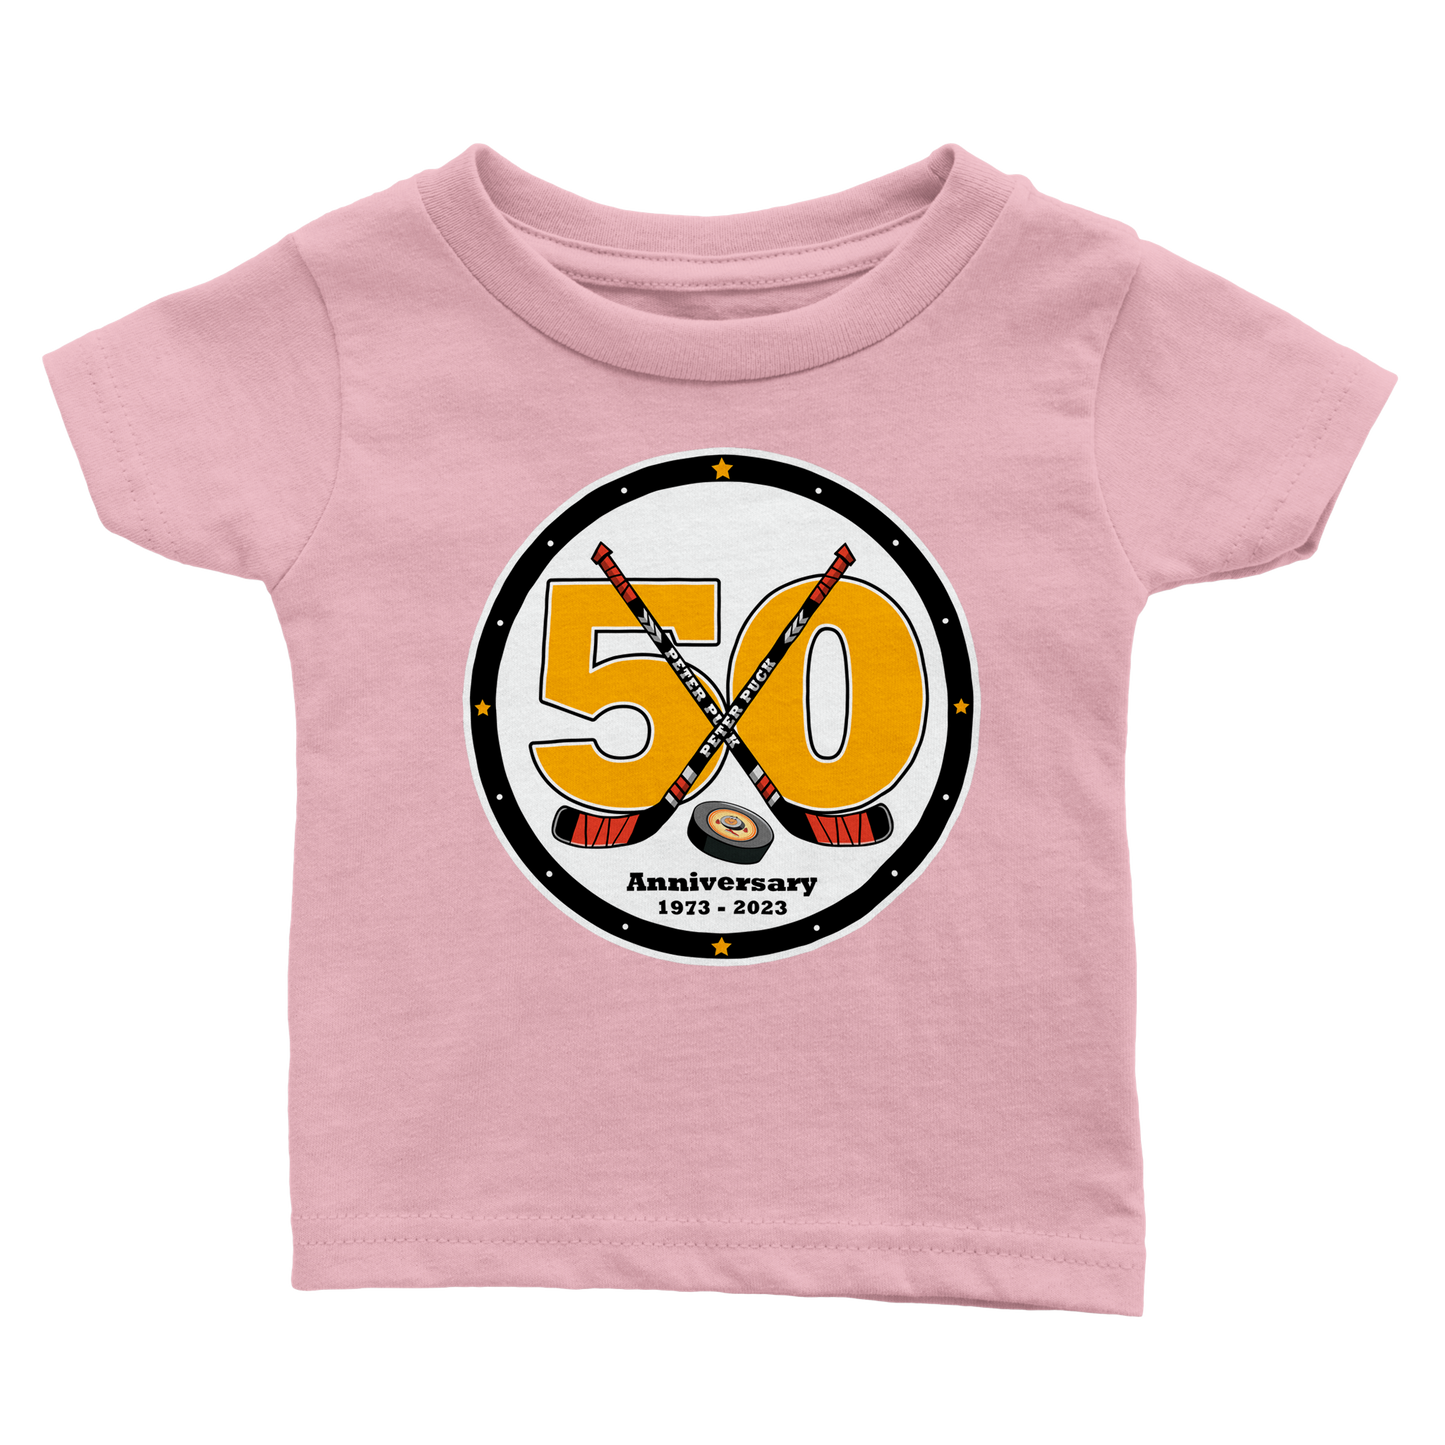 Peter's 50th Anniversary Crest Classic Baby Crewneck T-shirt